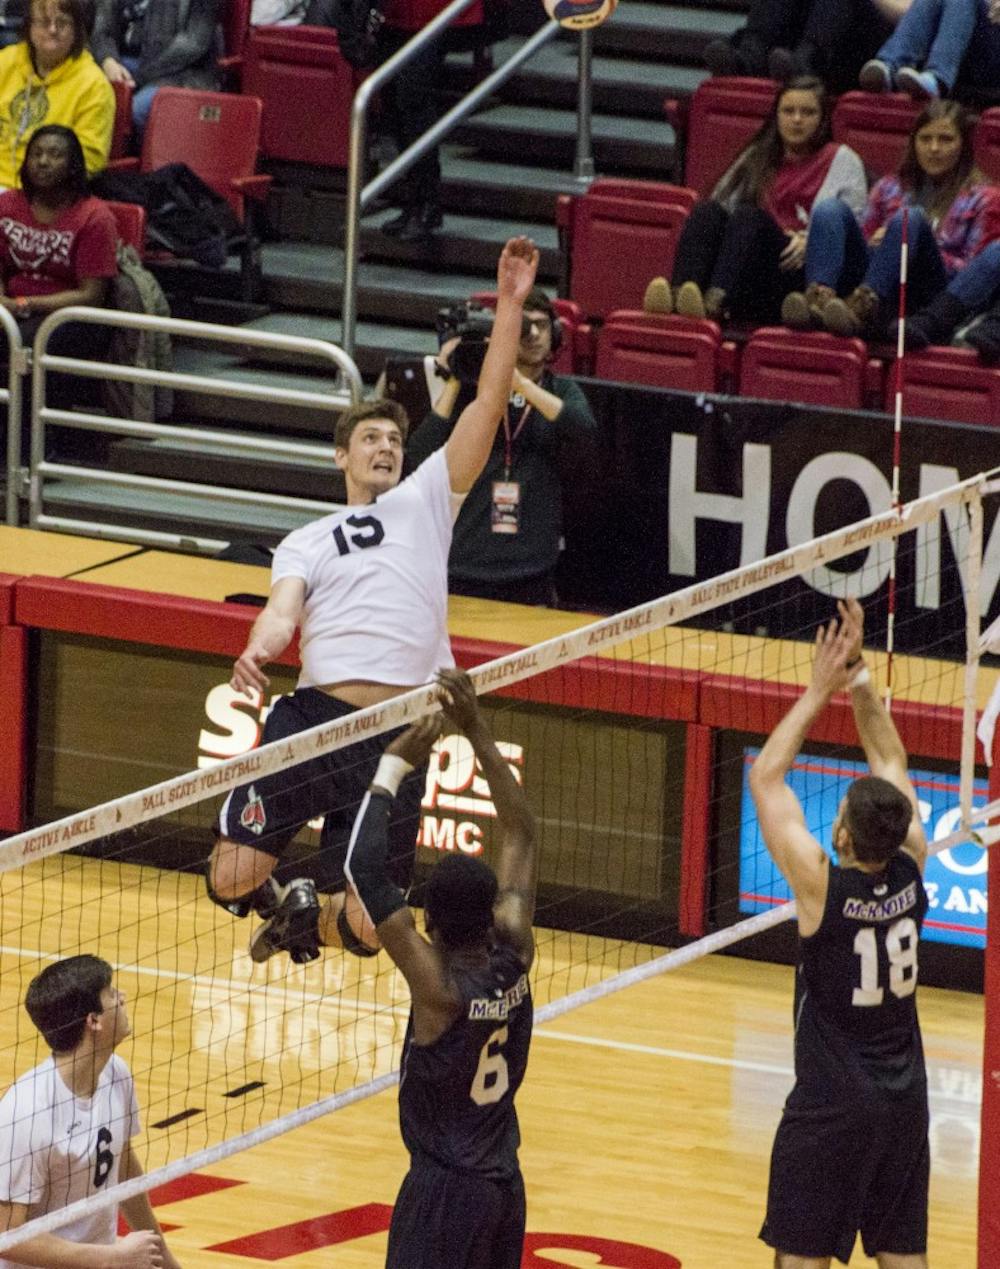 Junior outside attacker Marcin Niemczewski jumps to hit the ball during the game against McKendree on Feb. 20 at Worthen Arena. DN PHOTO ALAINA JAYE HALSEY